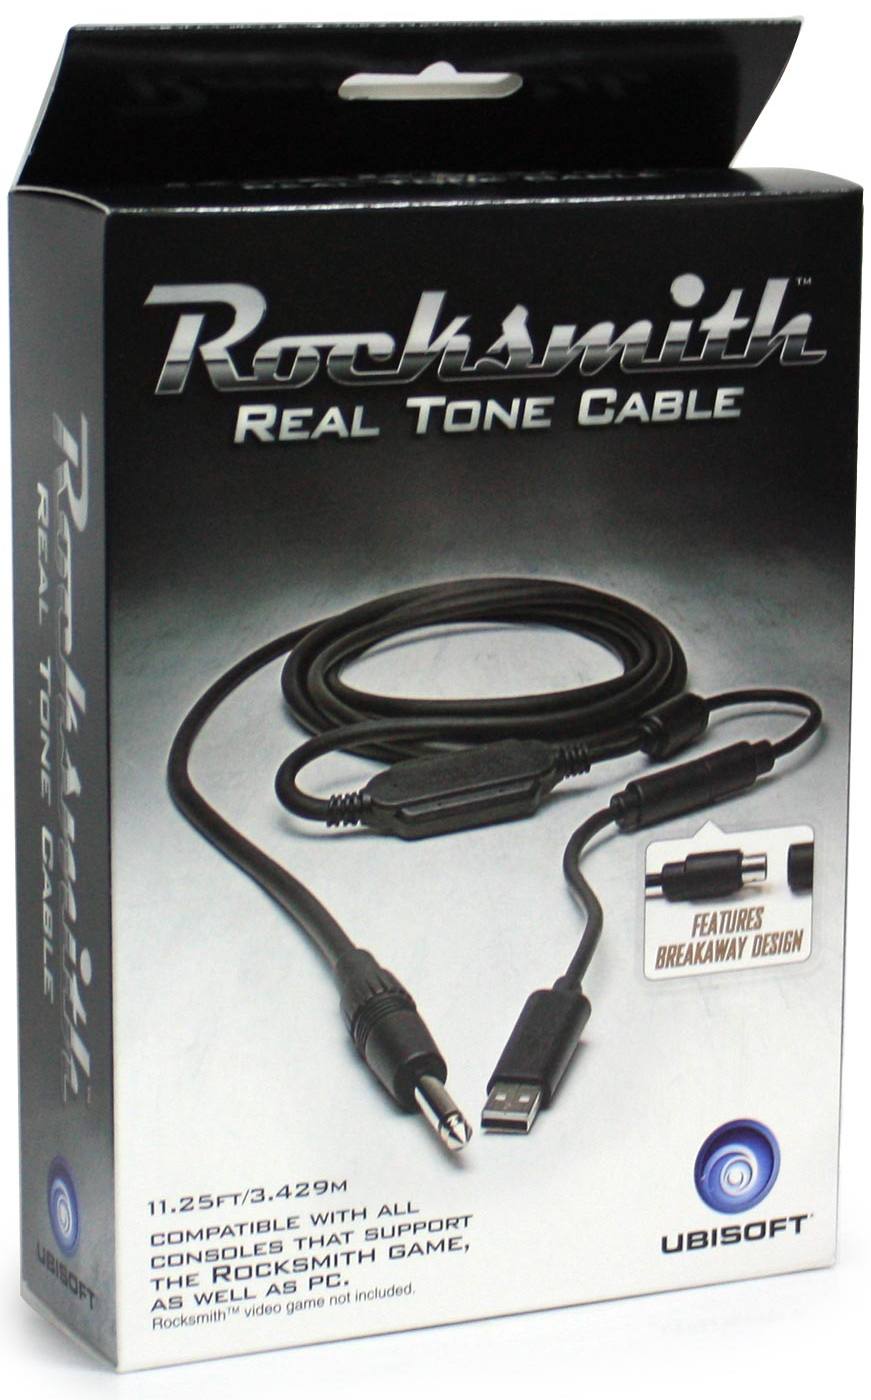 voormalig Komst passie Rocksmith Real Tone Cable for Windows, PlayStation 3, Xbox360